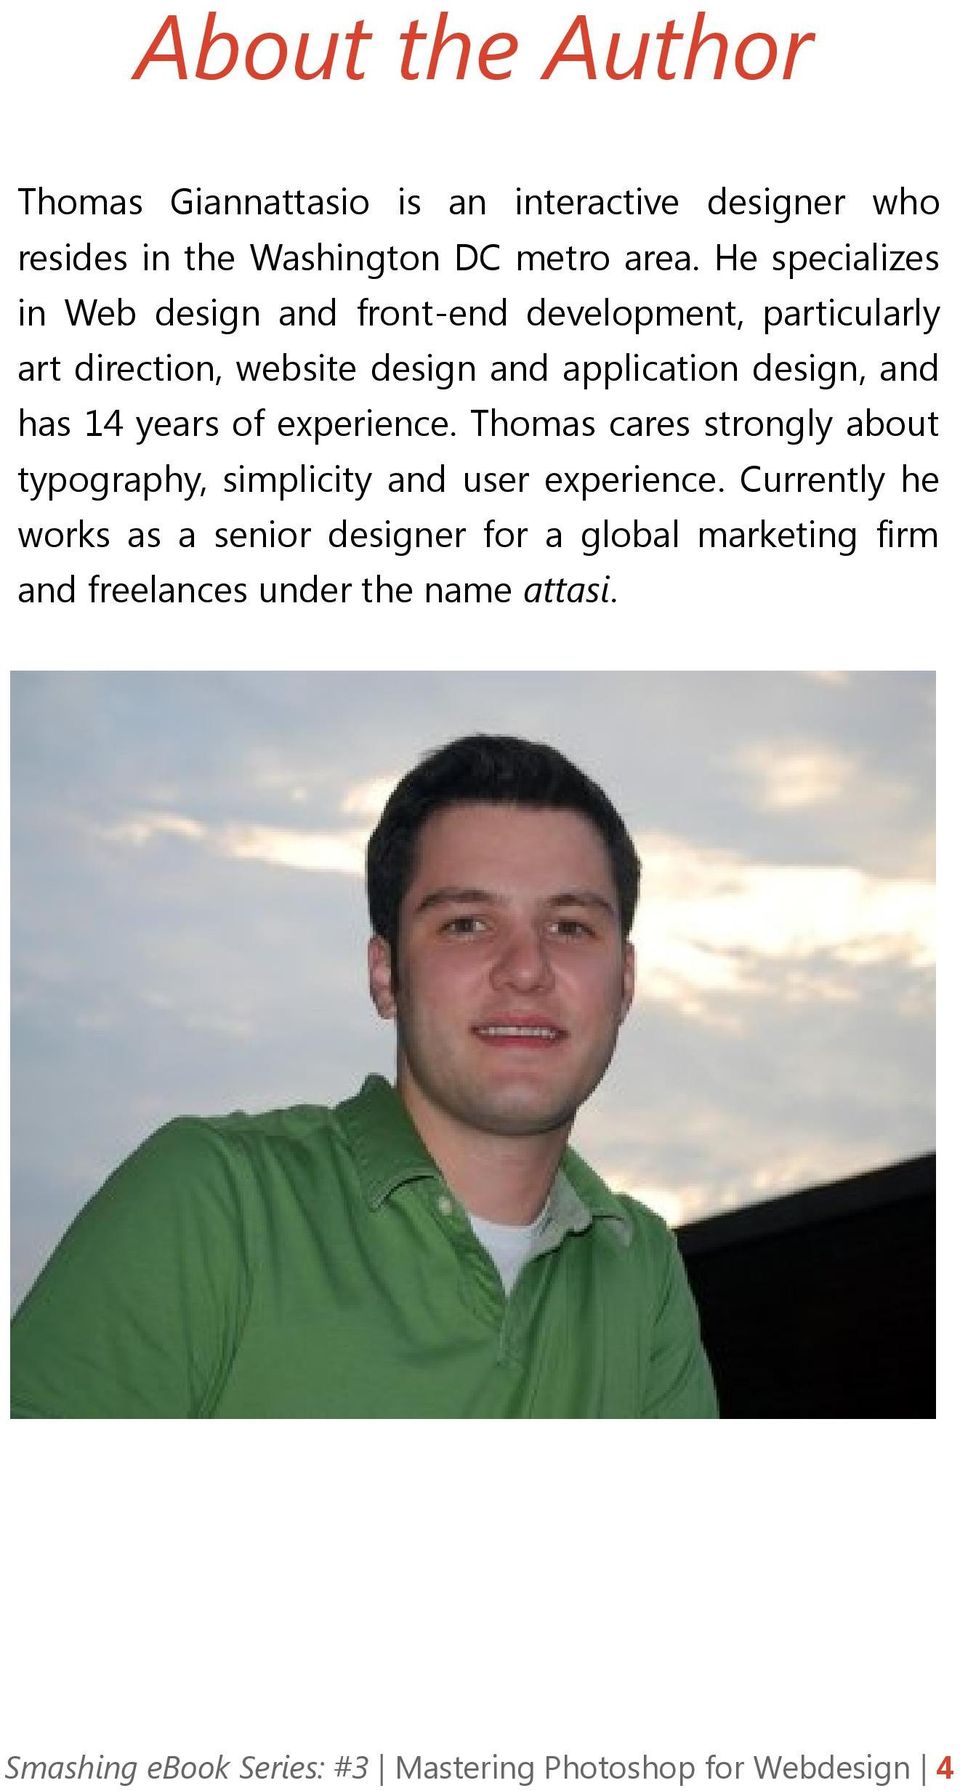 and has 14 years of experience. Thomas cares strongly about typography, simplicity and user experience.